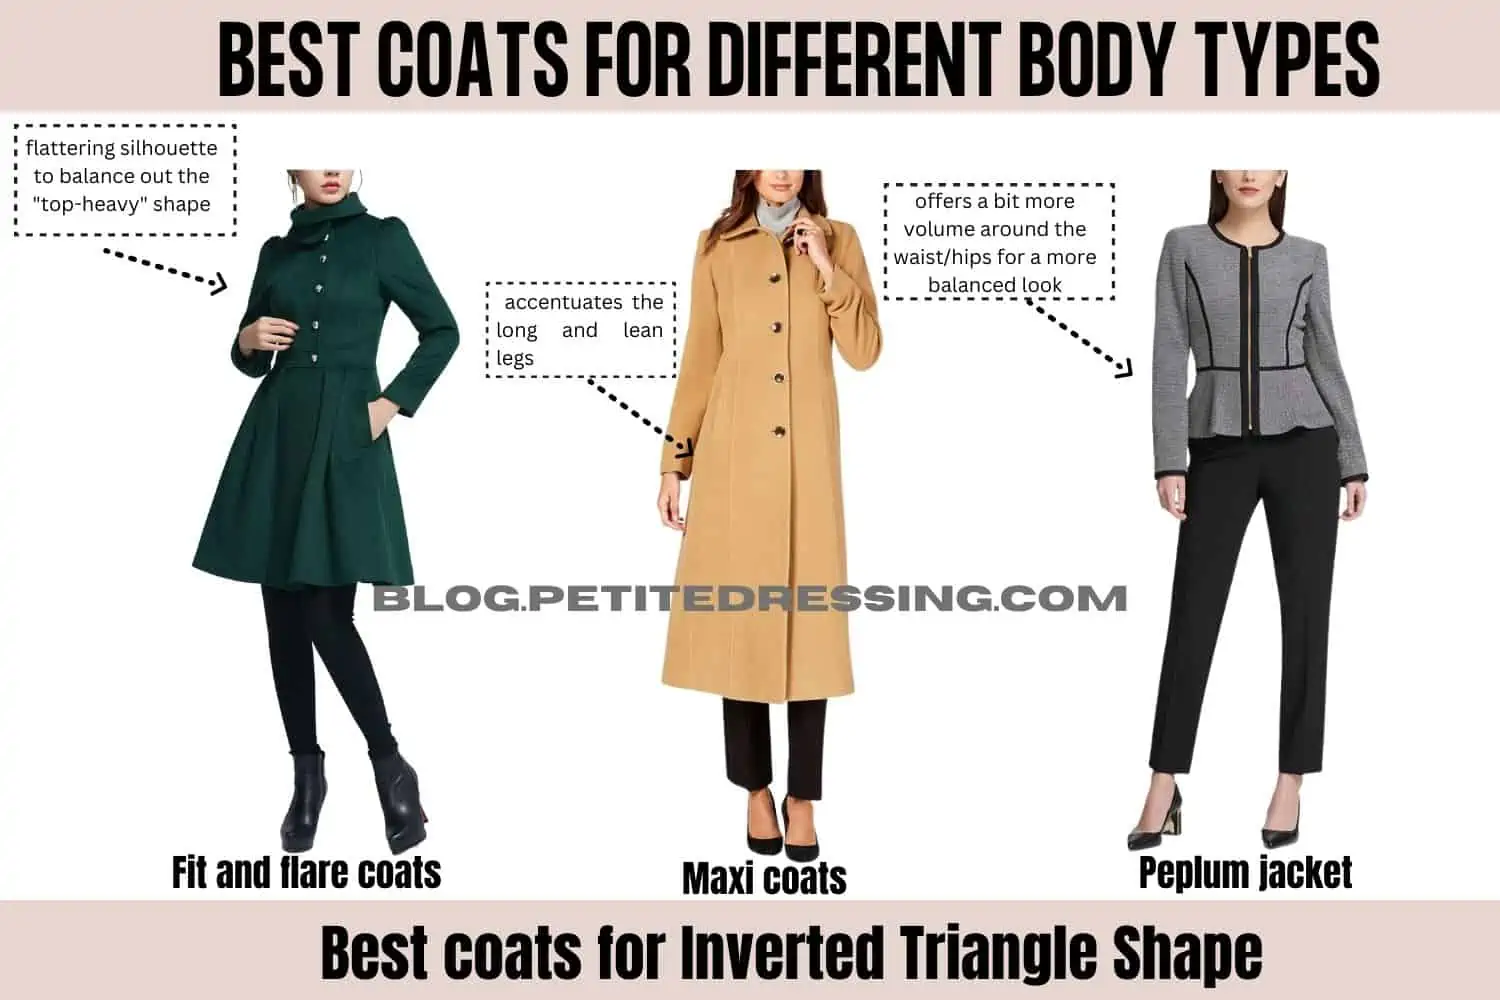 How to Choose the Best Coats for Different Body Types